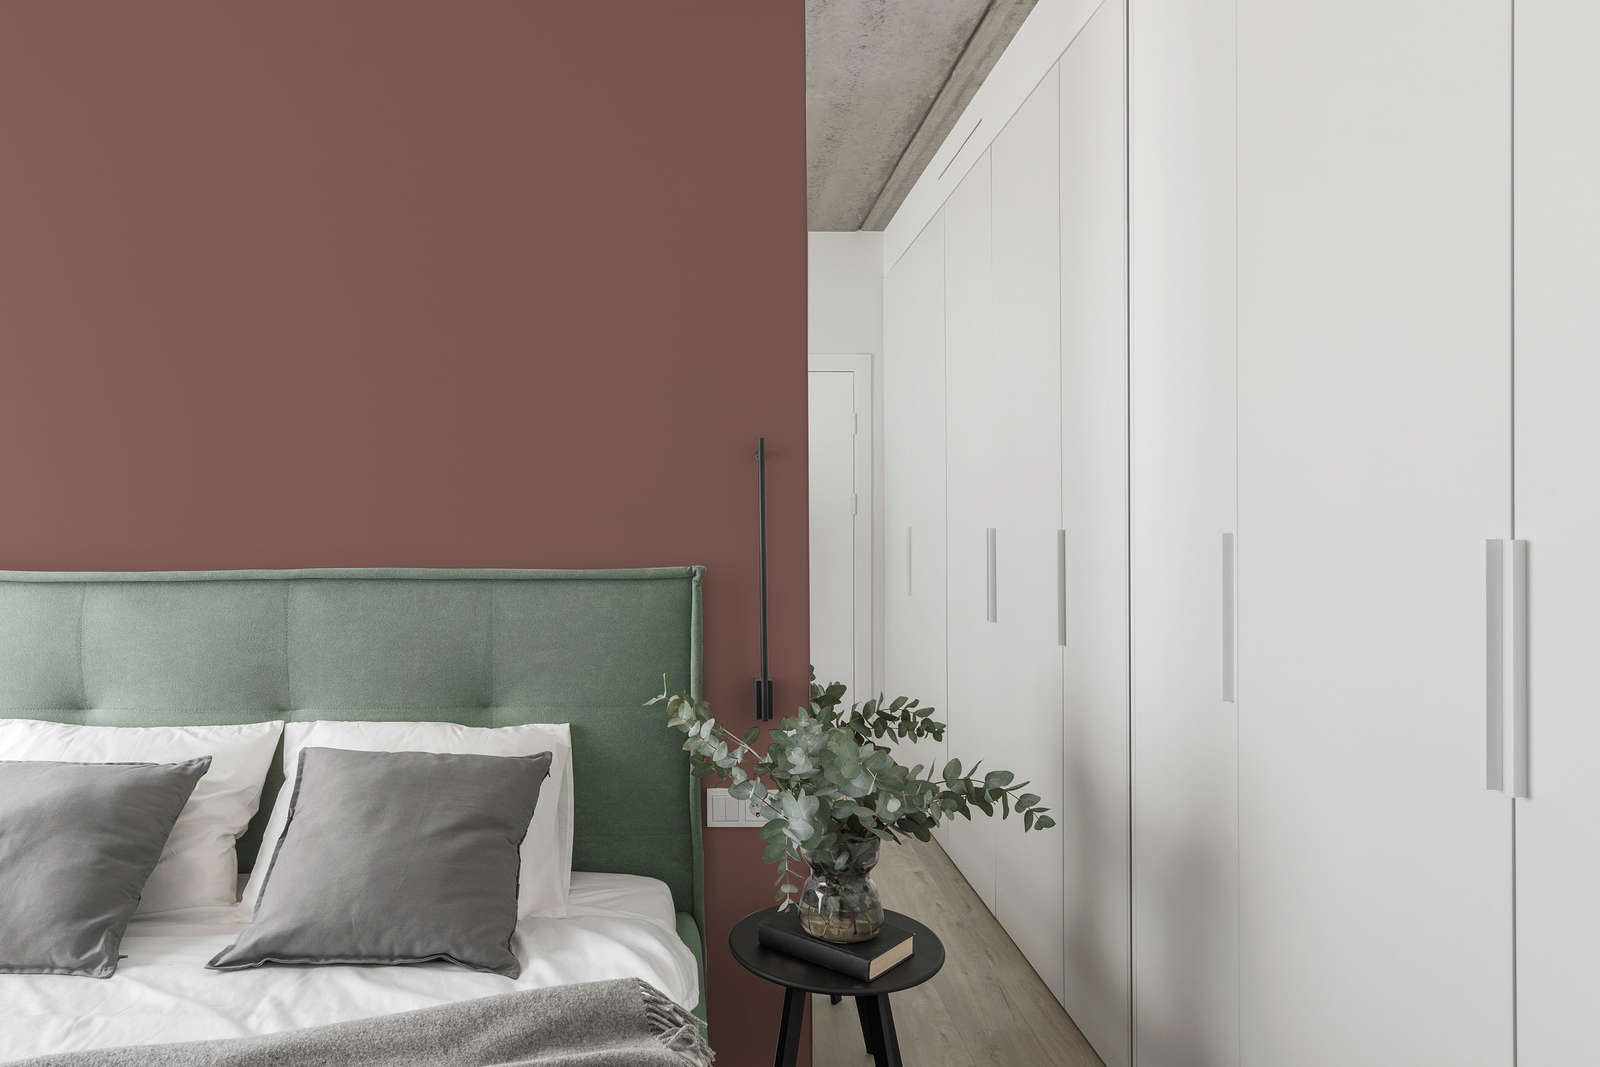             Premium Wall Paint Nature Dark Pink »Natural Nude« NW1012 – 1 litre
        